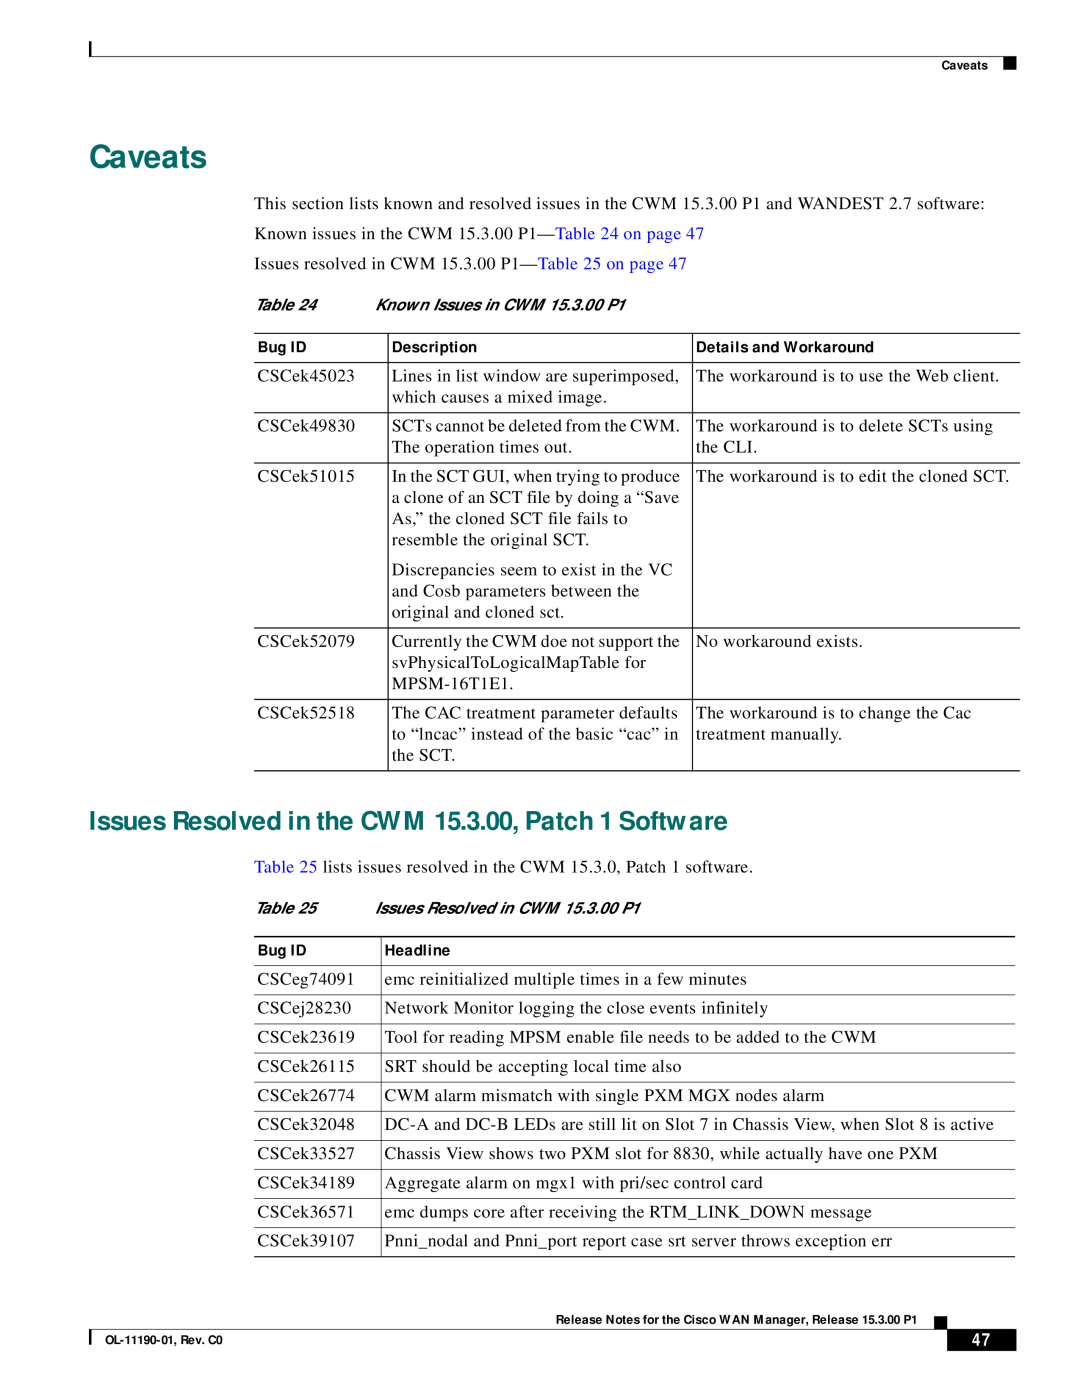 Cisco Systems 15.3.00P1 manual Caveats, Issues Resolved in the CWM 15.3.00, Patch 1 Software 